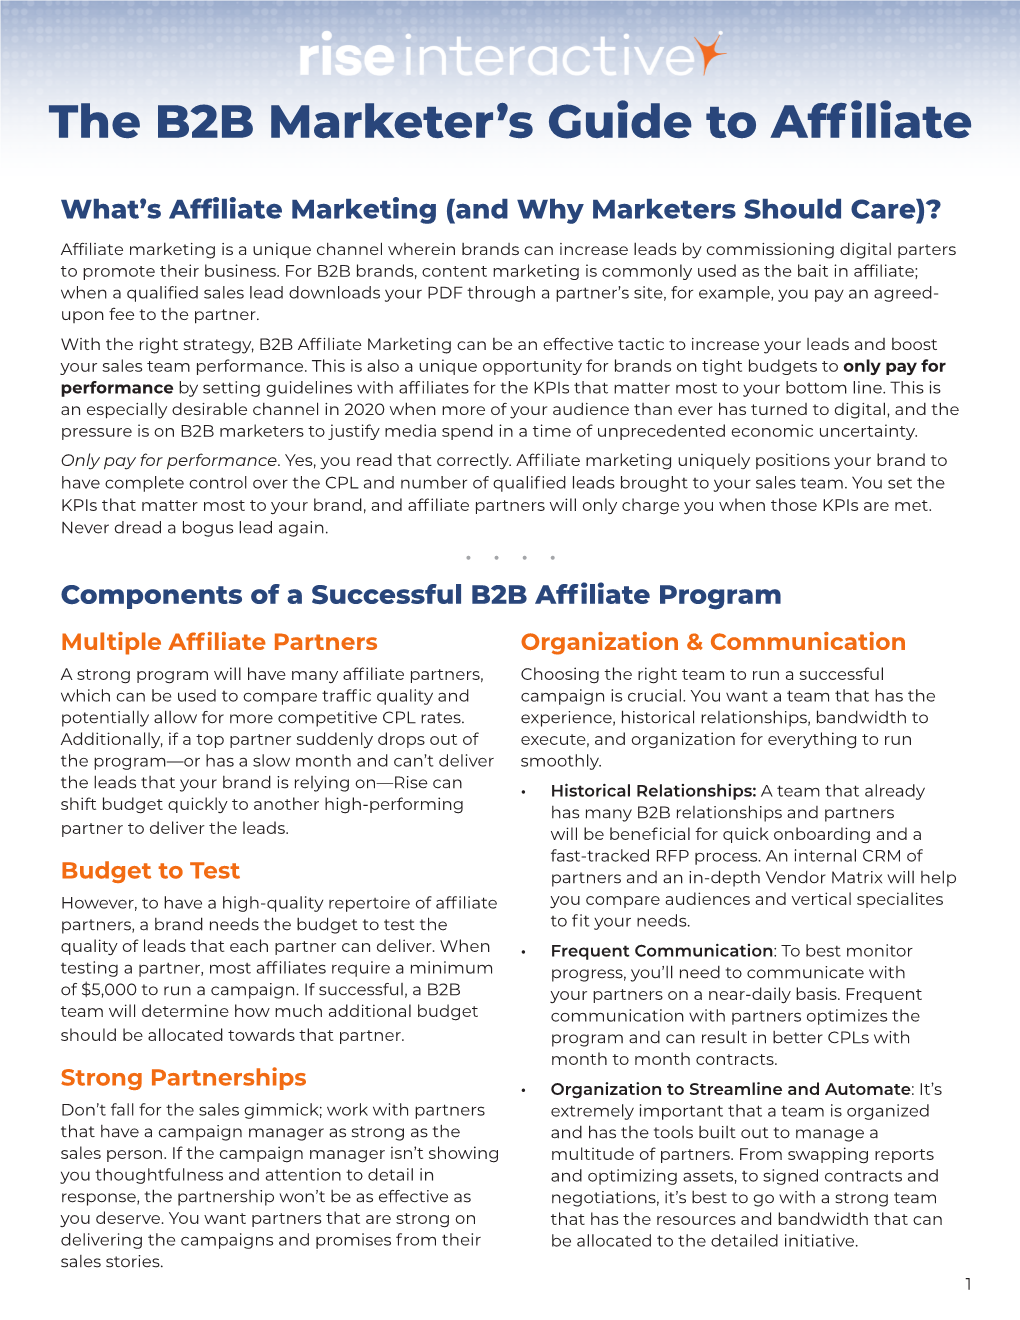 The B2B Marketer's Guide to Affiliate